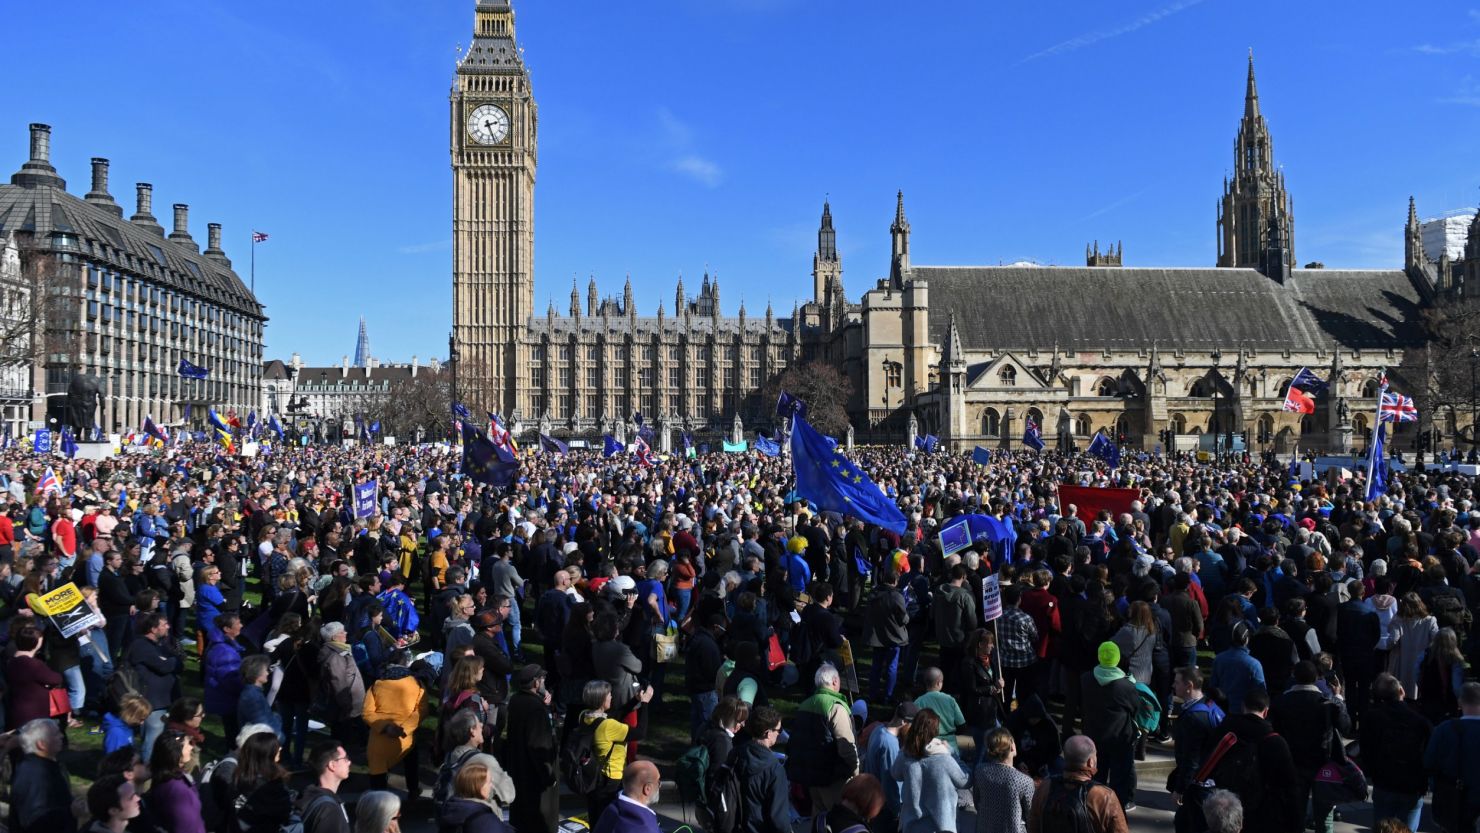 Demonstrators with EU flags gather Saturday near the Houses of Parliament in London.